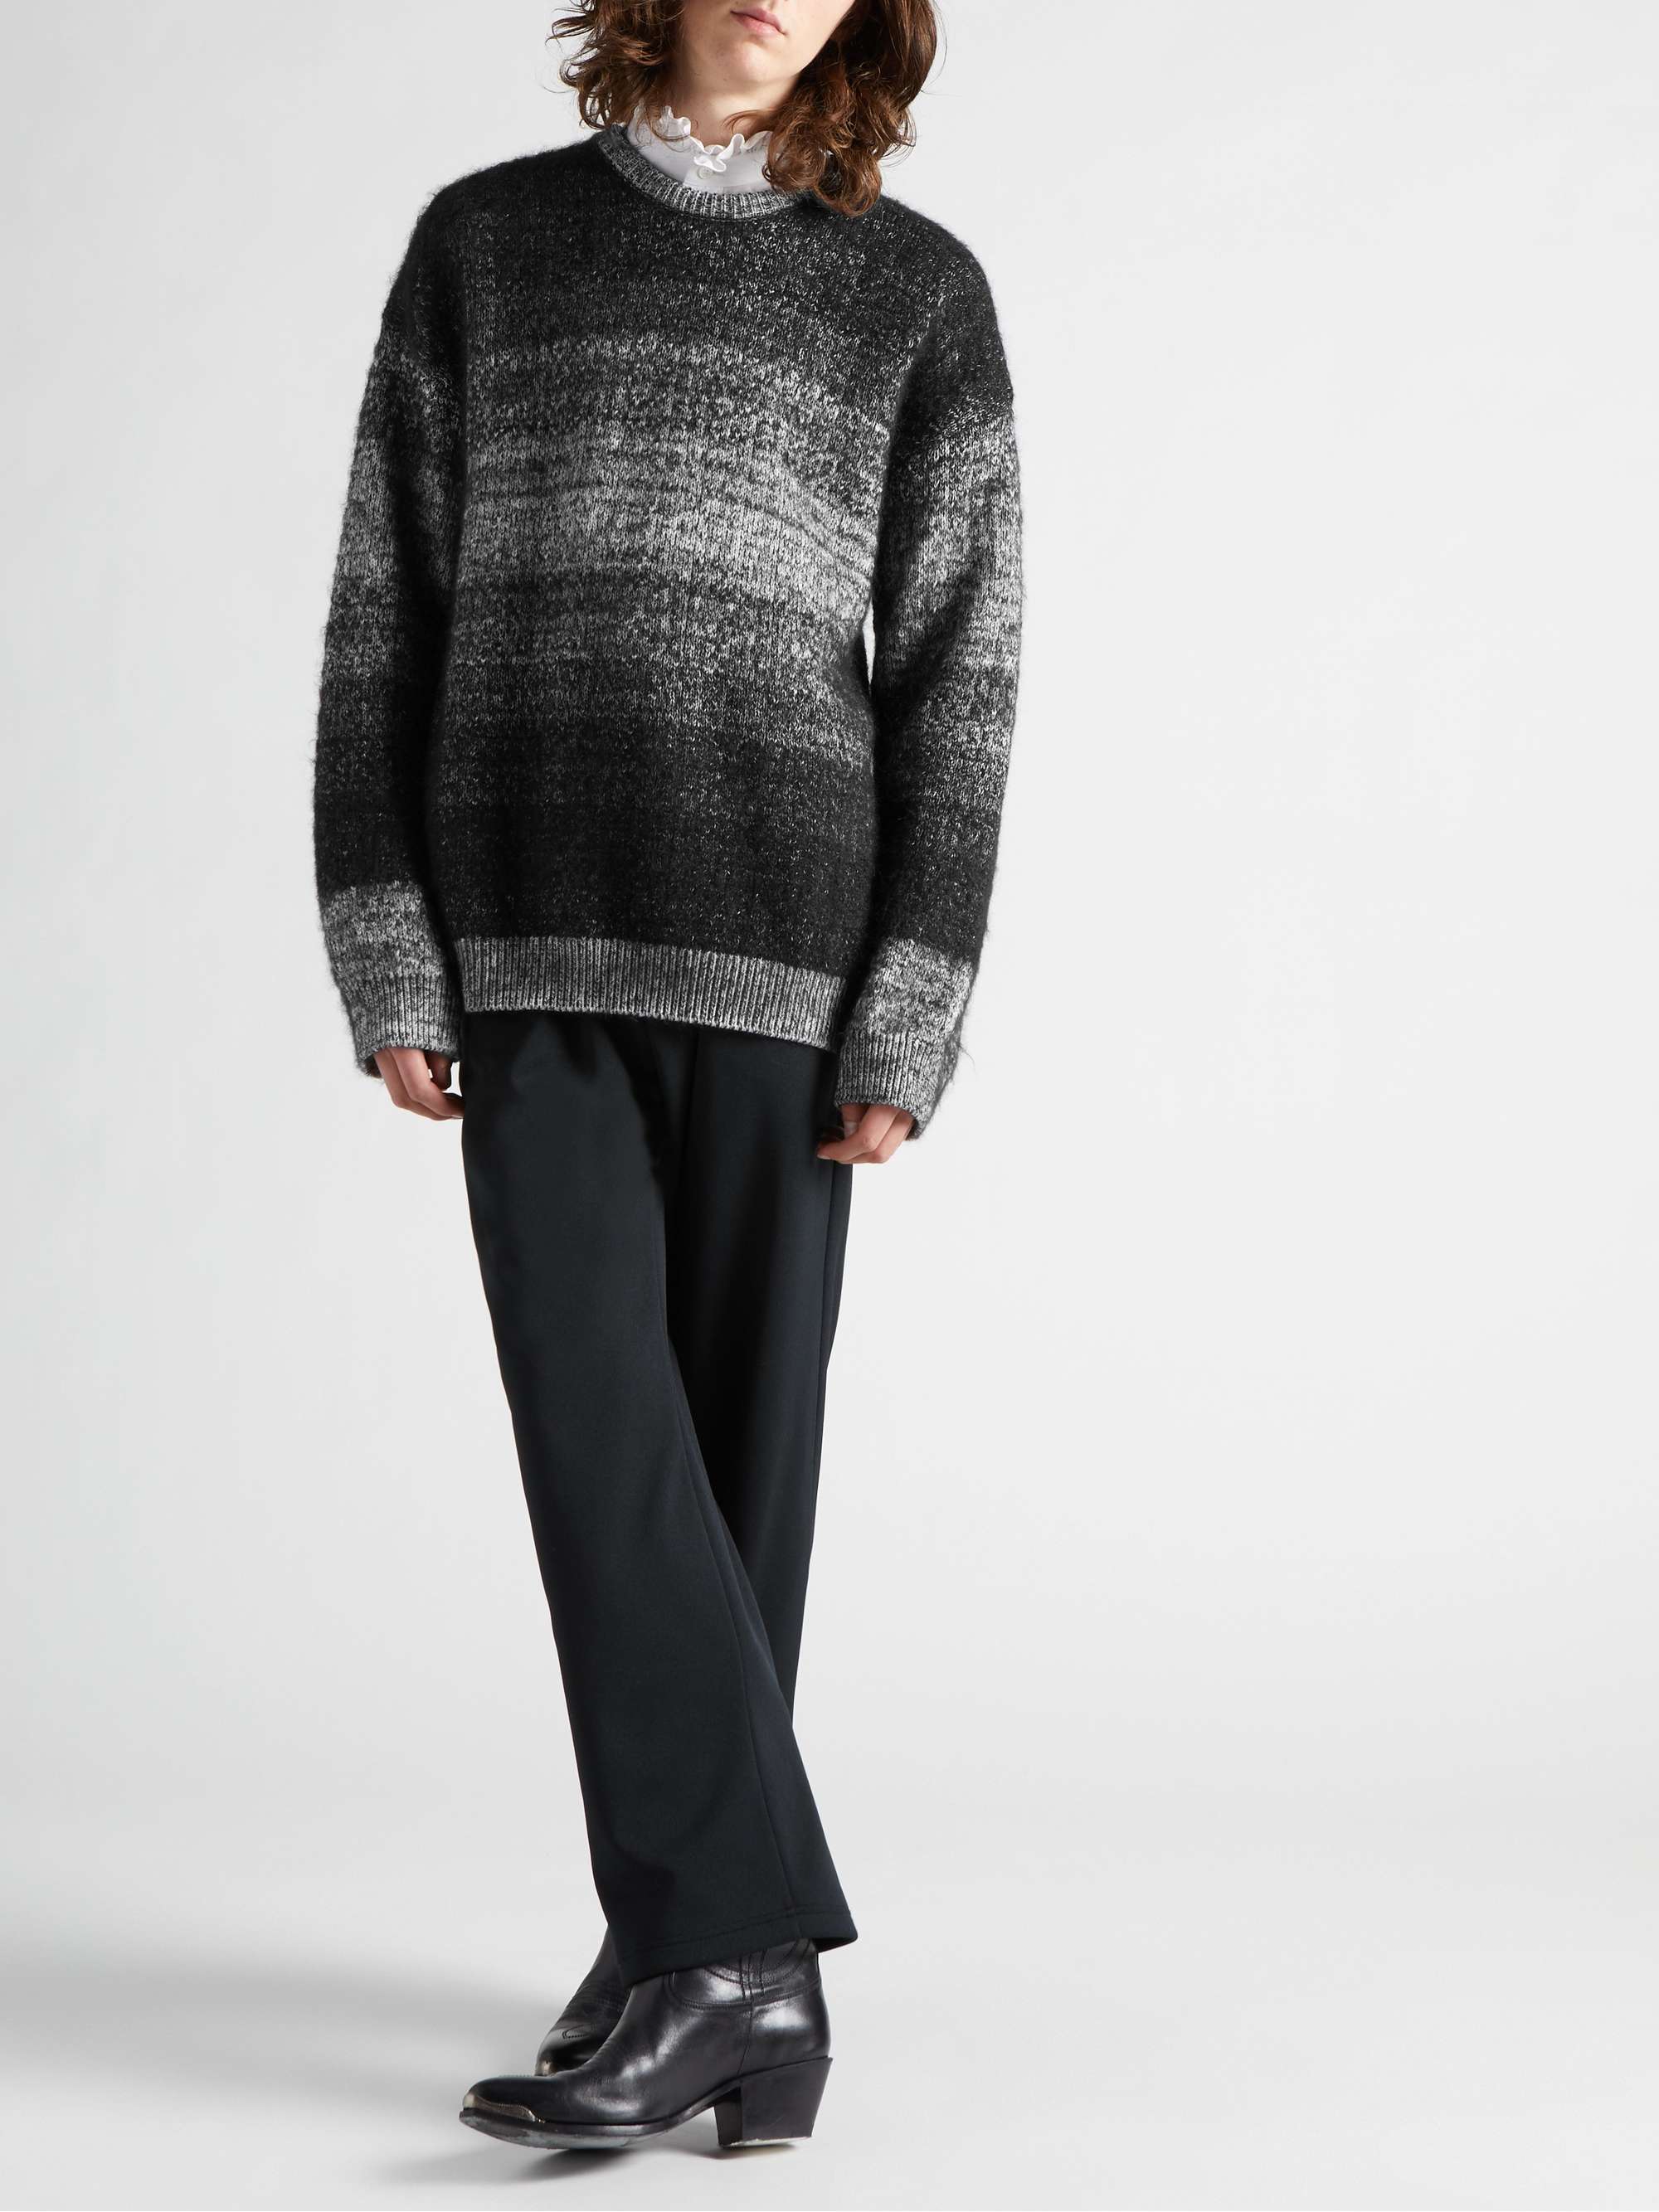 CELINE HOMME Oversized Striped Intarsia Cotton and Mohair-Blend Sweater